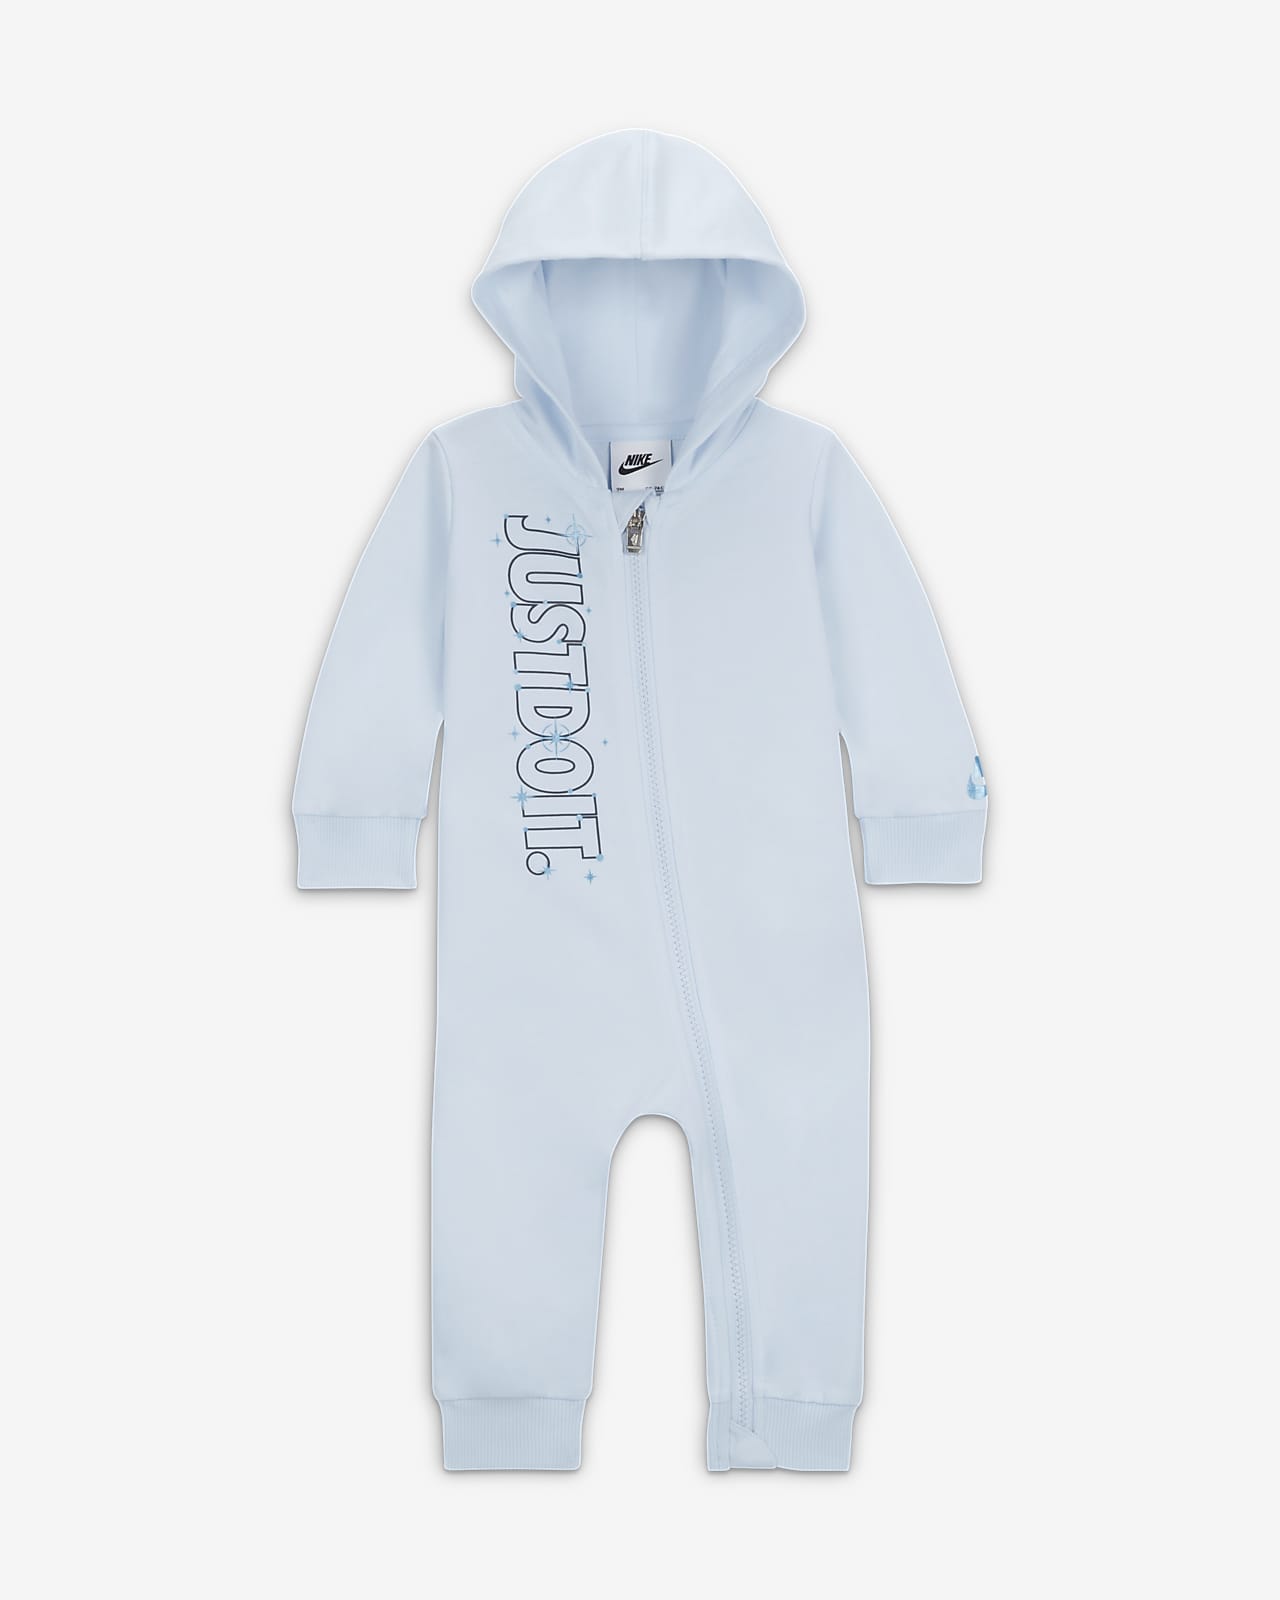 Nike Sportswear Shine Graphic Hooded Coverall Baby Coverall